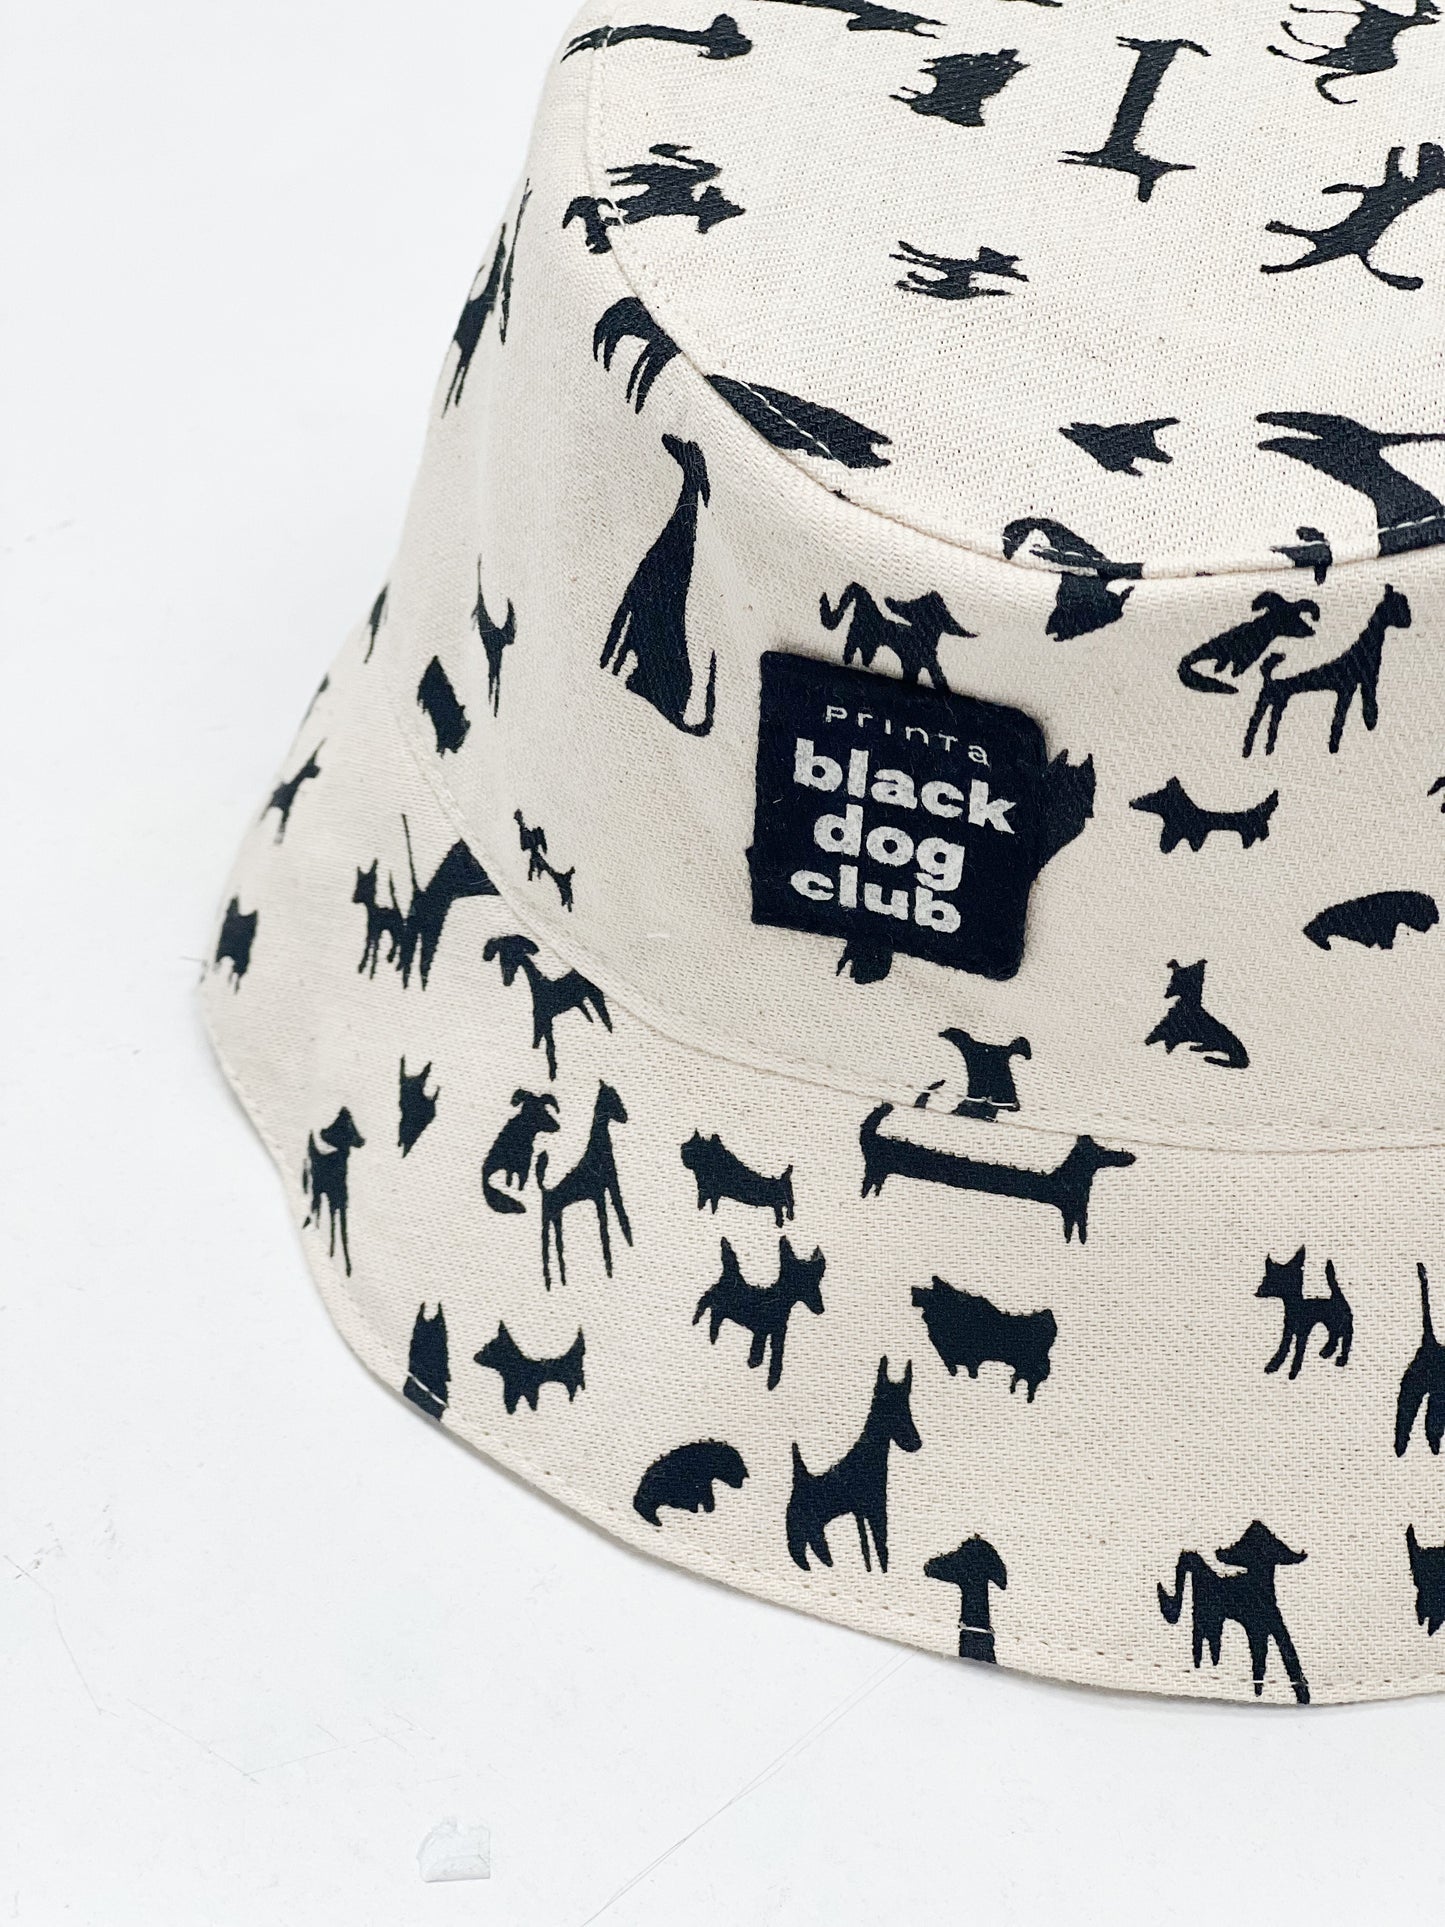 Bucket hat for childrens with Black dog club pattern